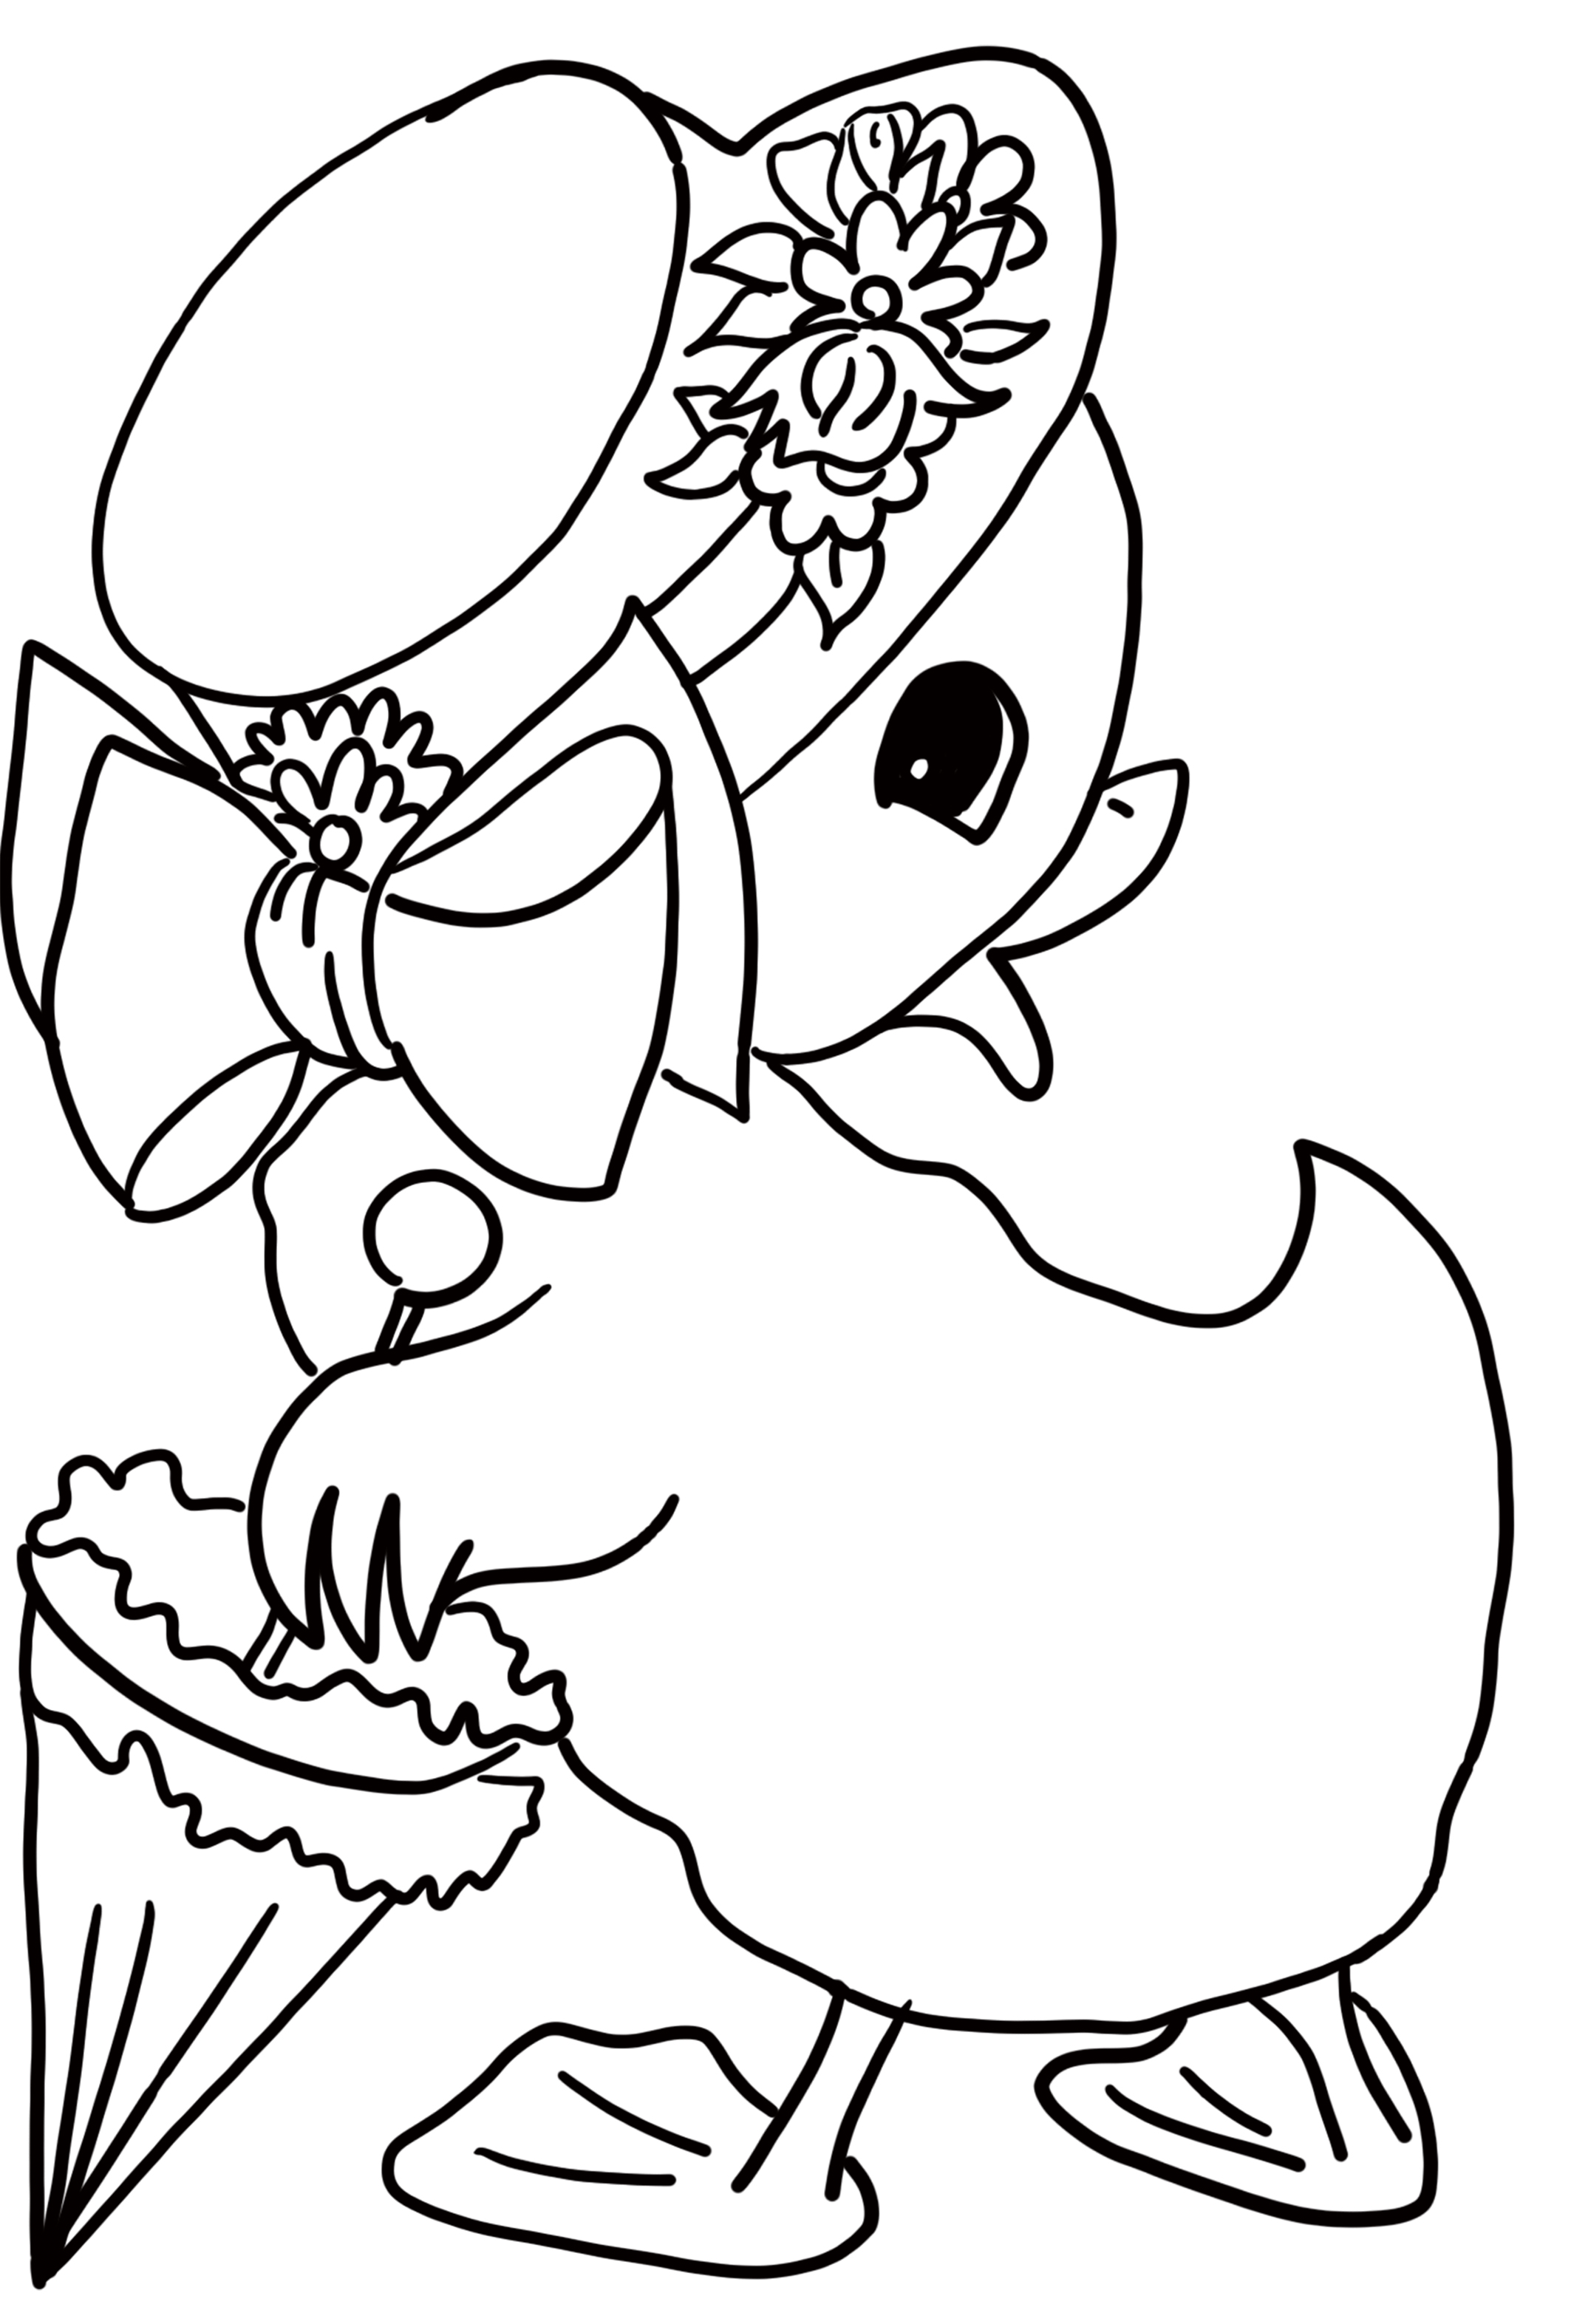 Cartoon Free Coloring Pages For Kids For Easter with simple drawing